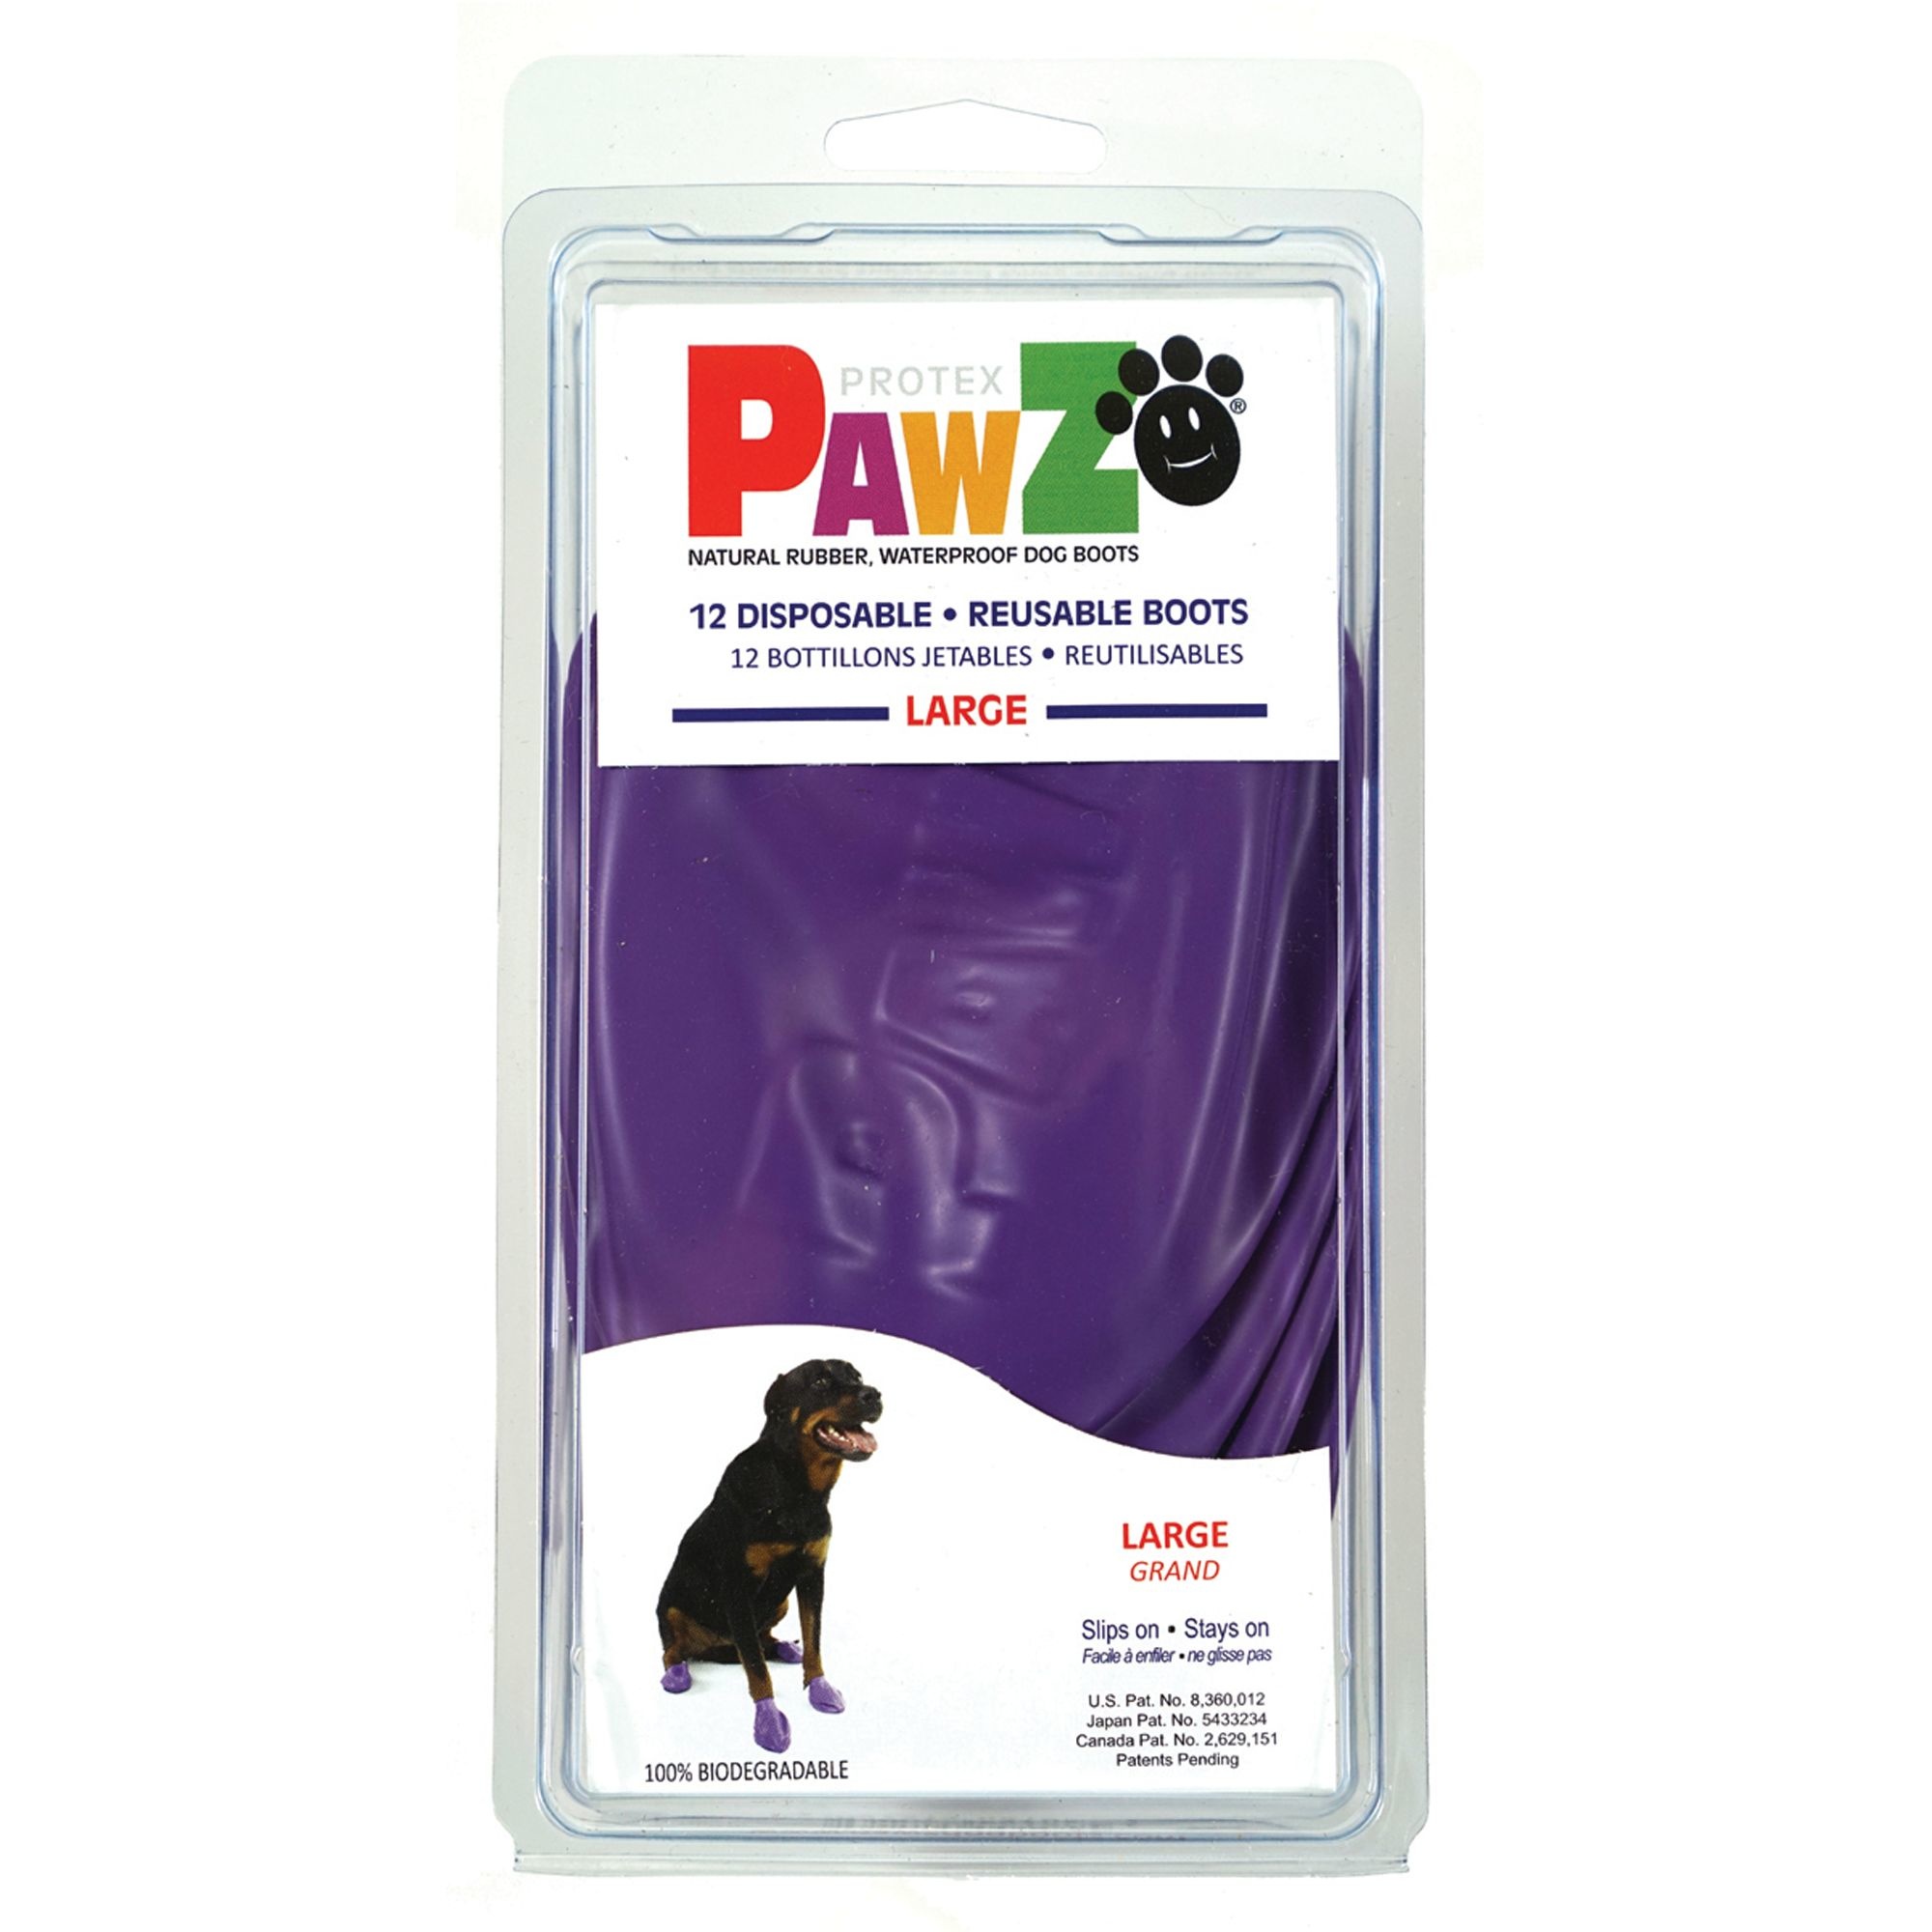 PawZ Disposable Rubber Dog Boots